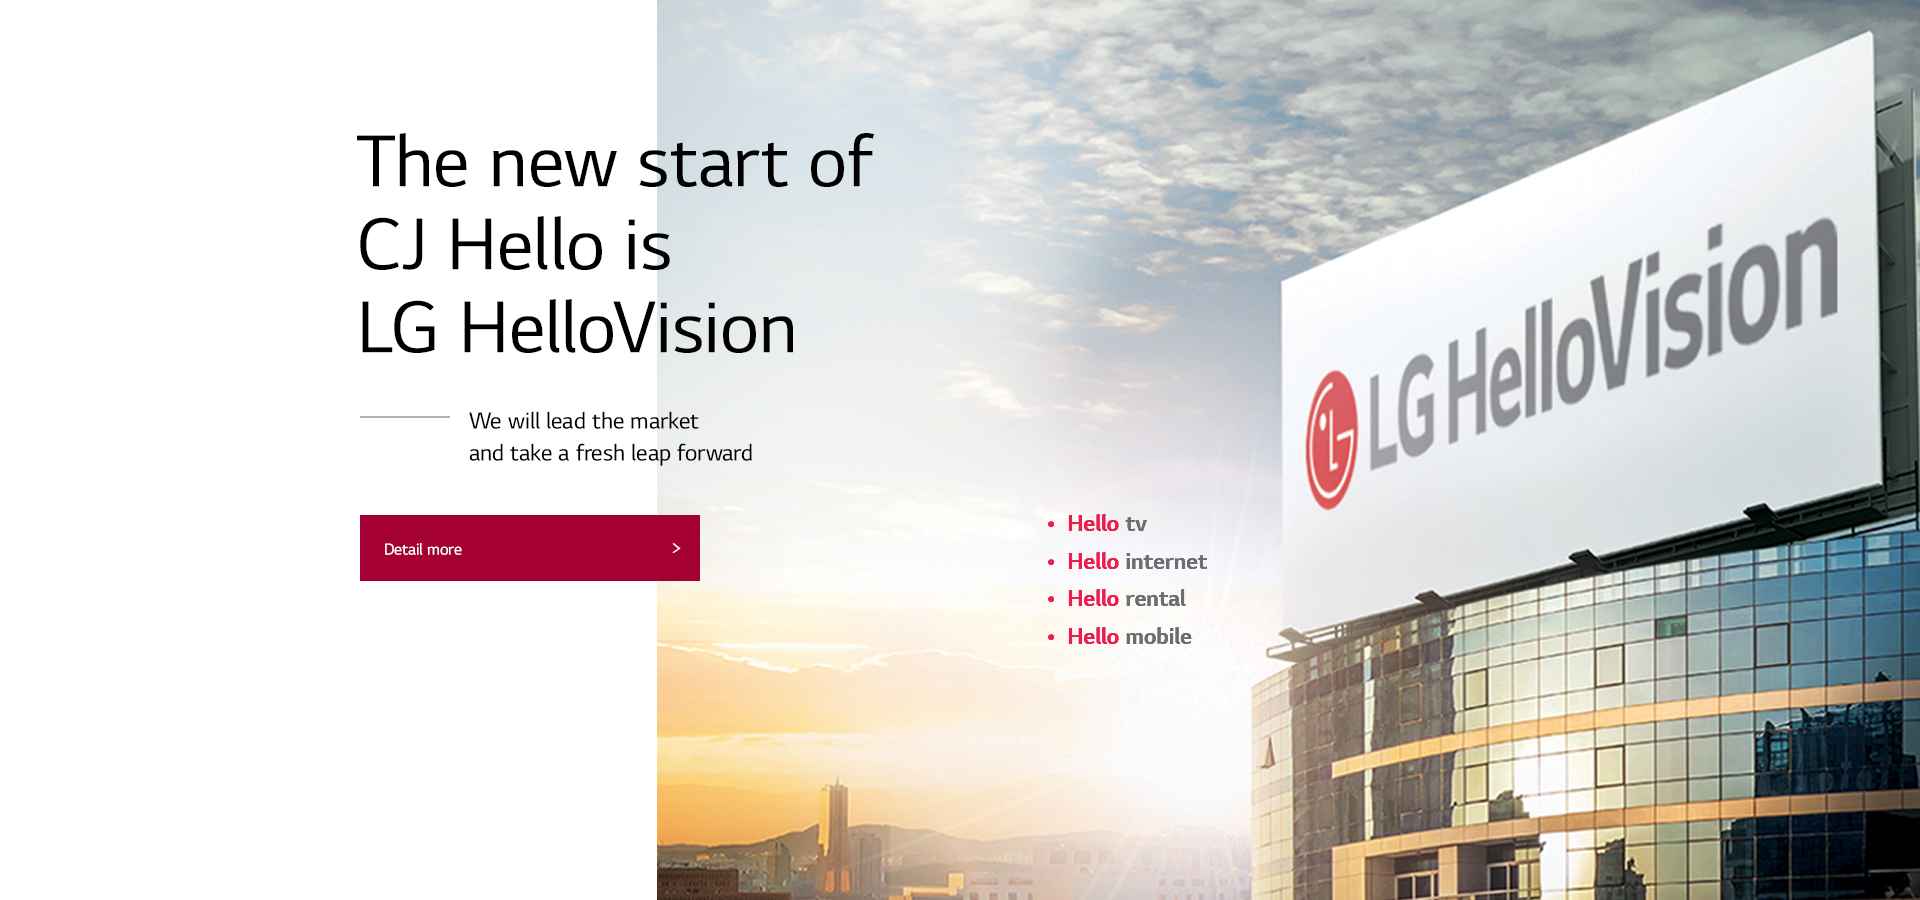 The new start of CJ Hello is LG HelloVision
We will lead the market and take a fresh leap forward